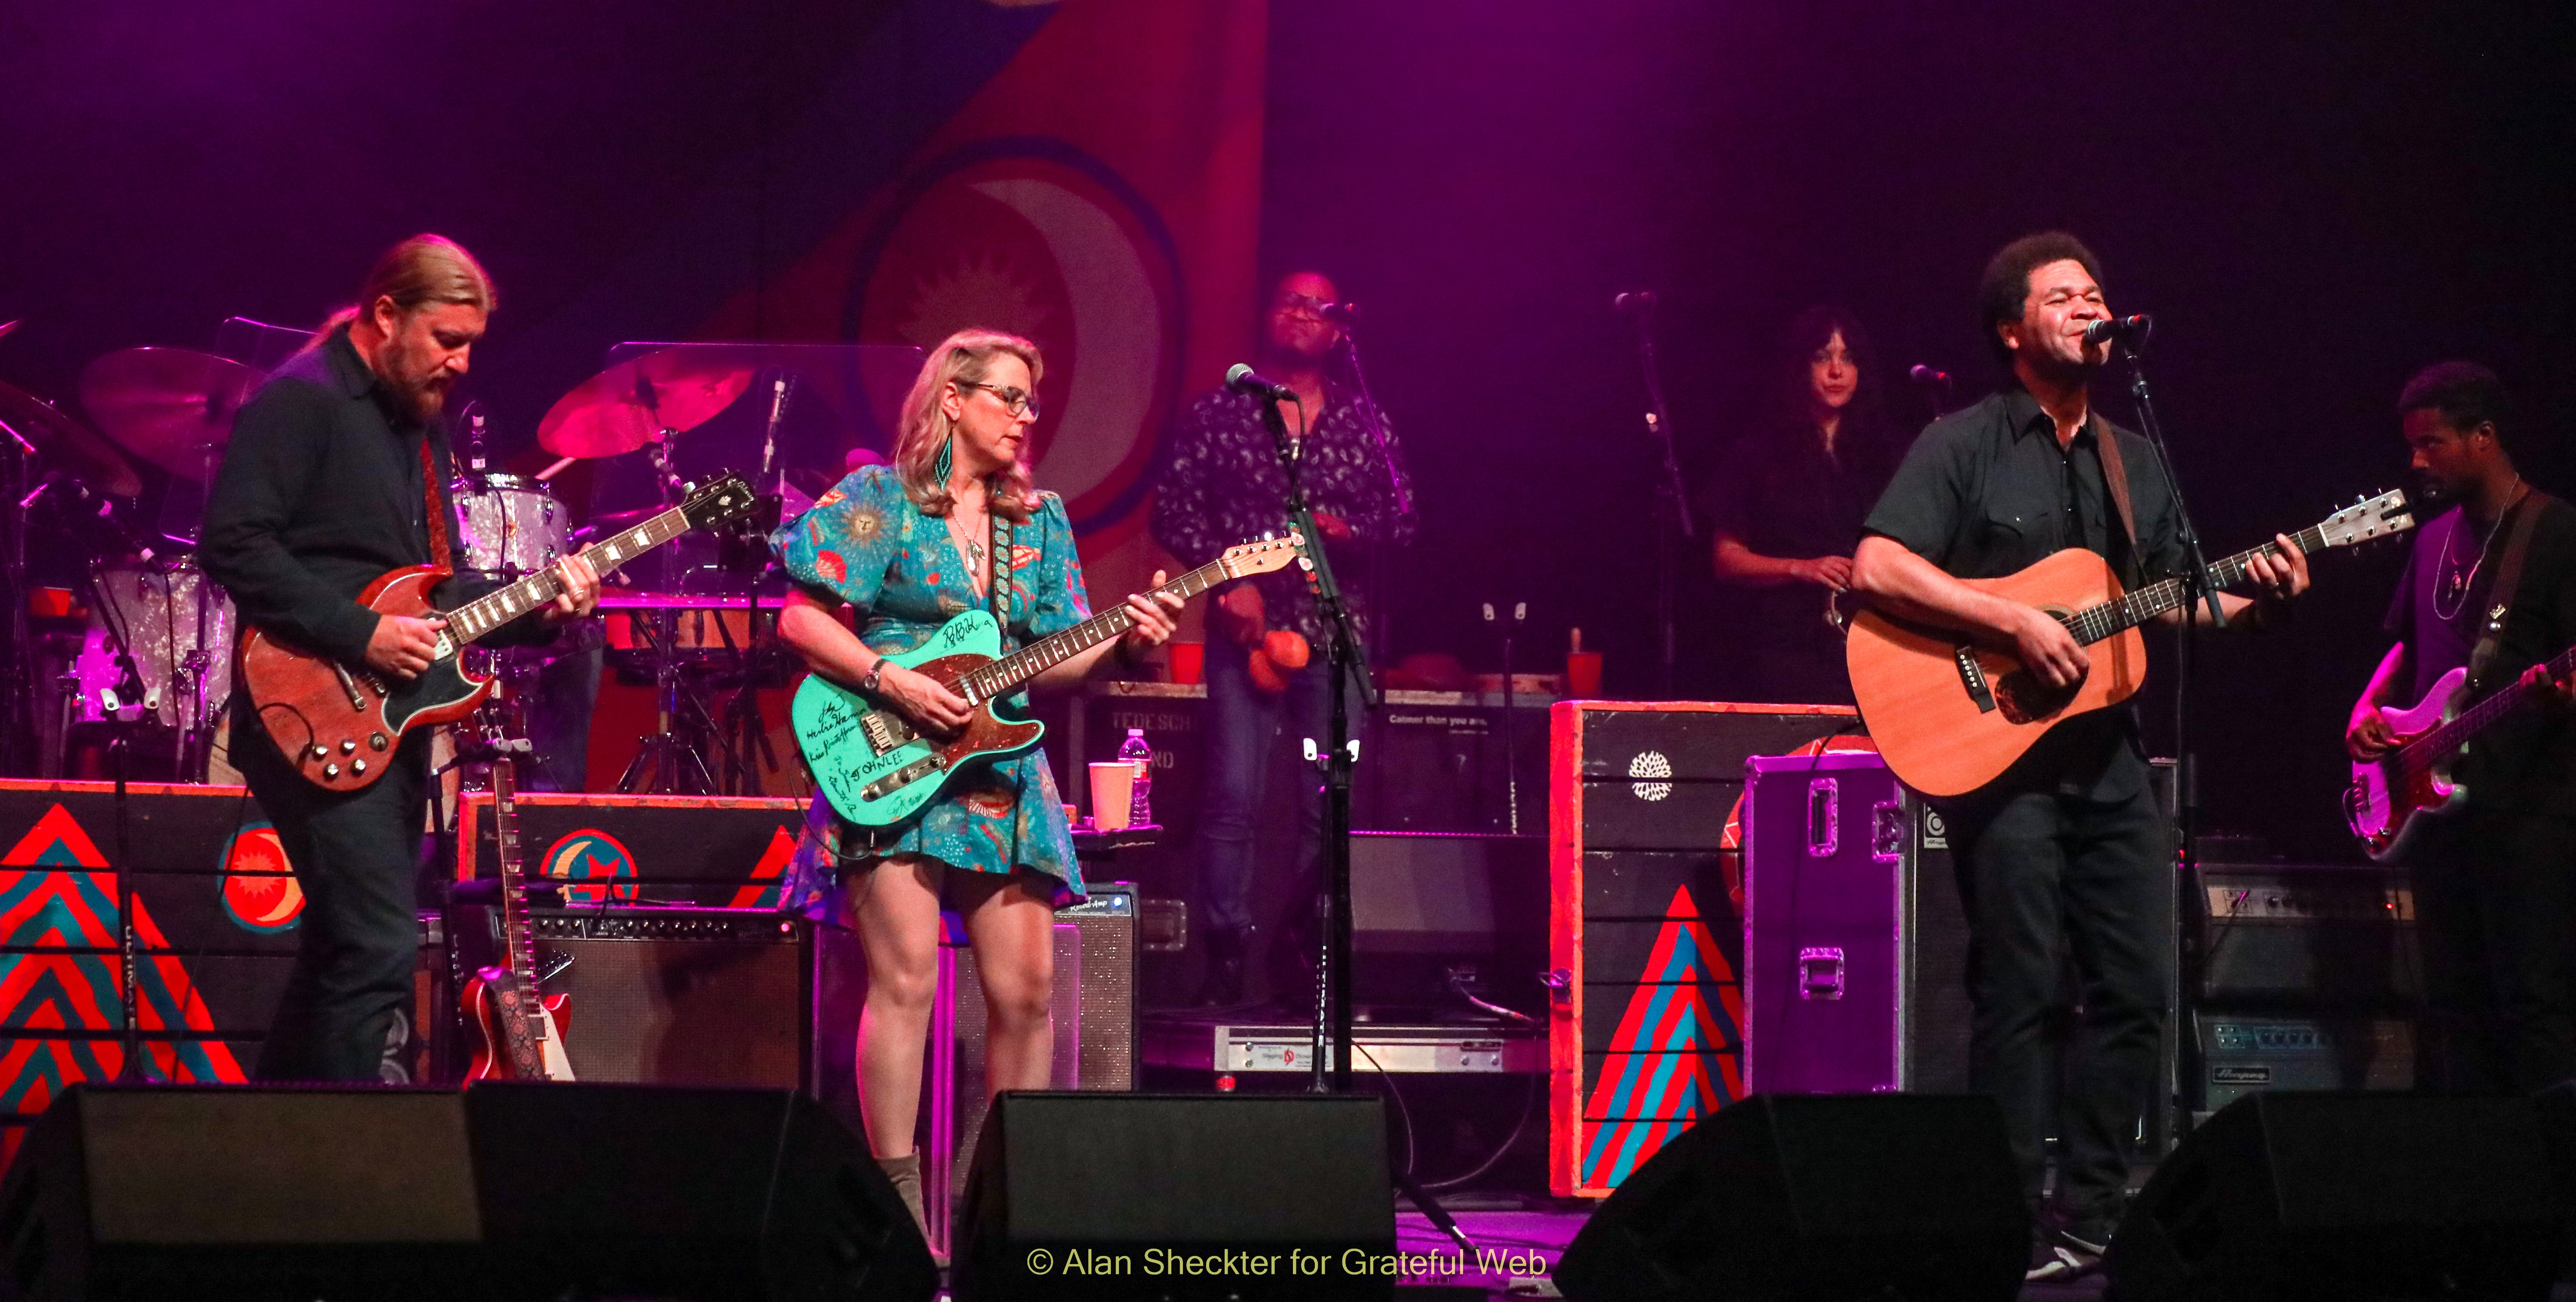 Mike Mattison on guitar and vocals with Tedeschi Trucks Band